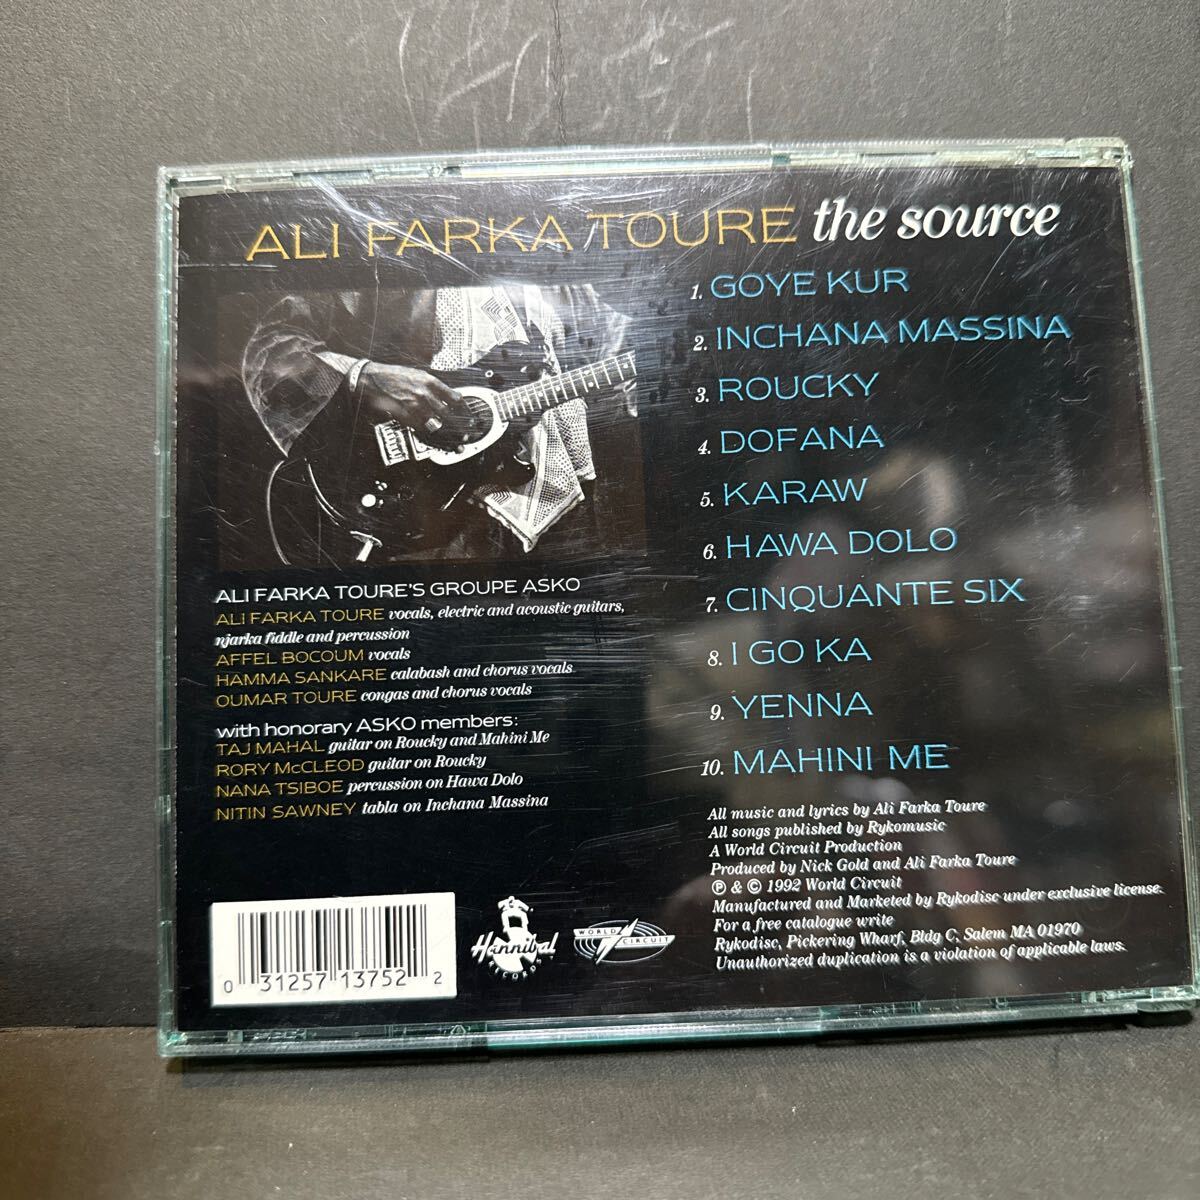 ALI FARKA TOURE foreign record CD the source